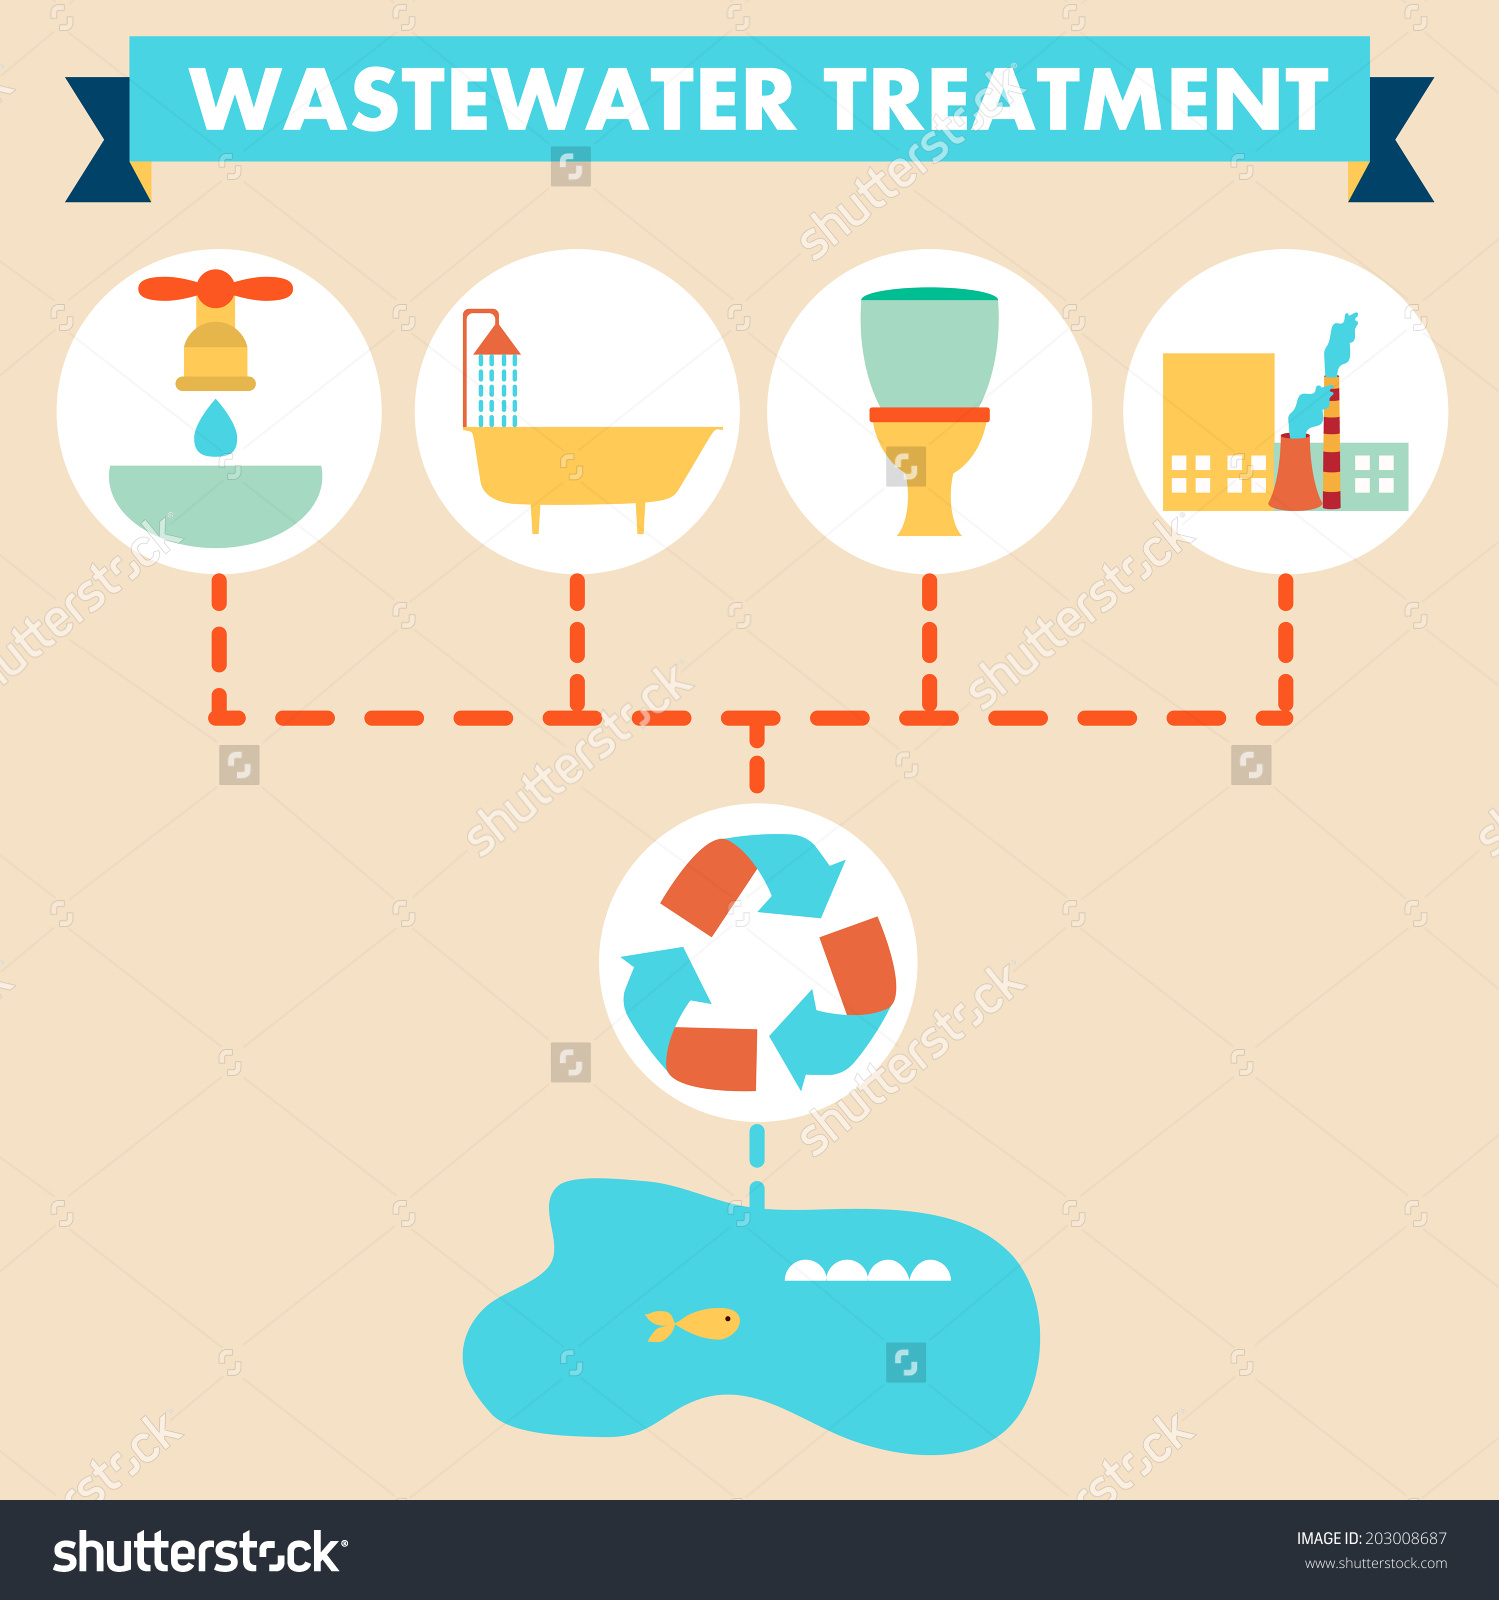 Wastewater clipart - Clipground horse brushes diagram 